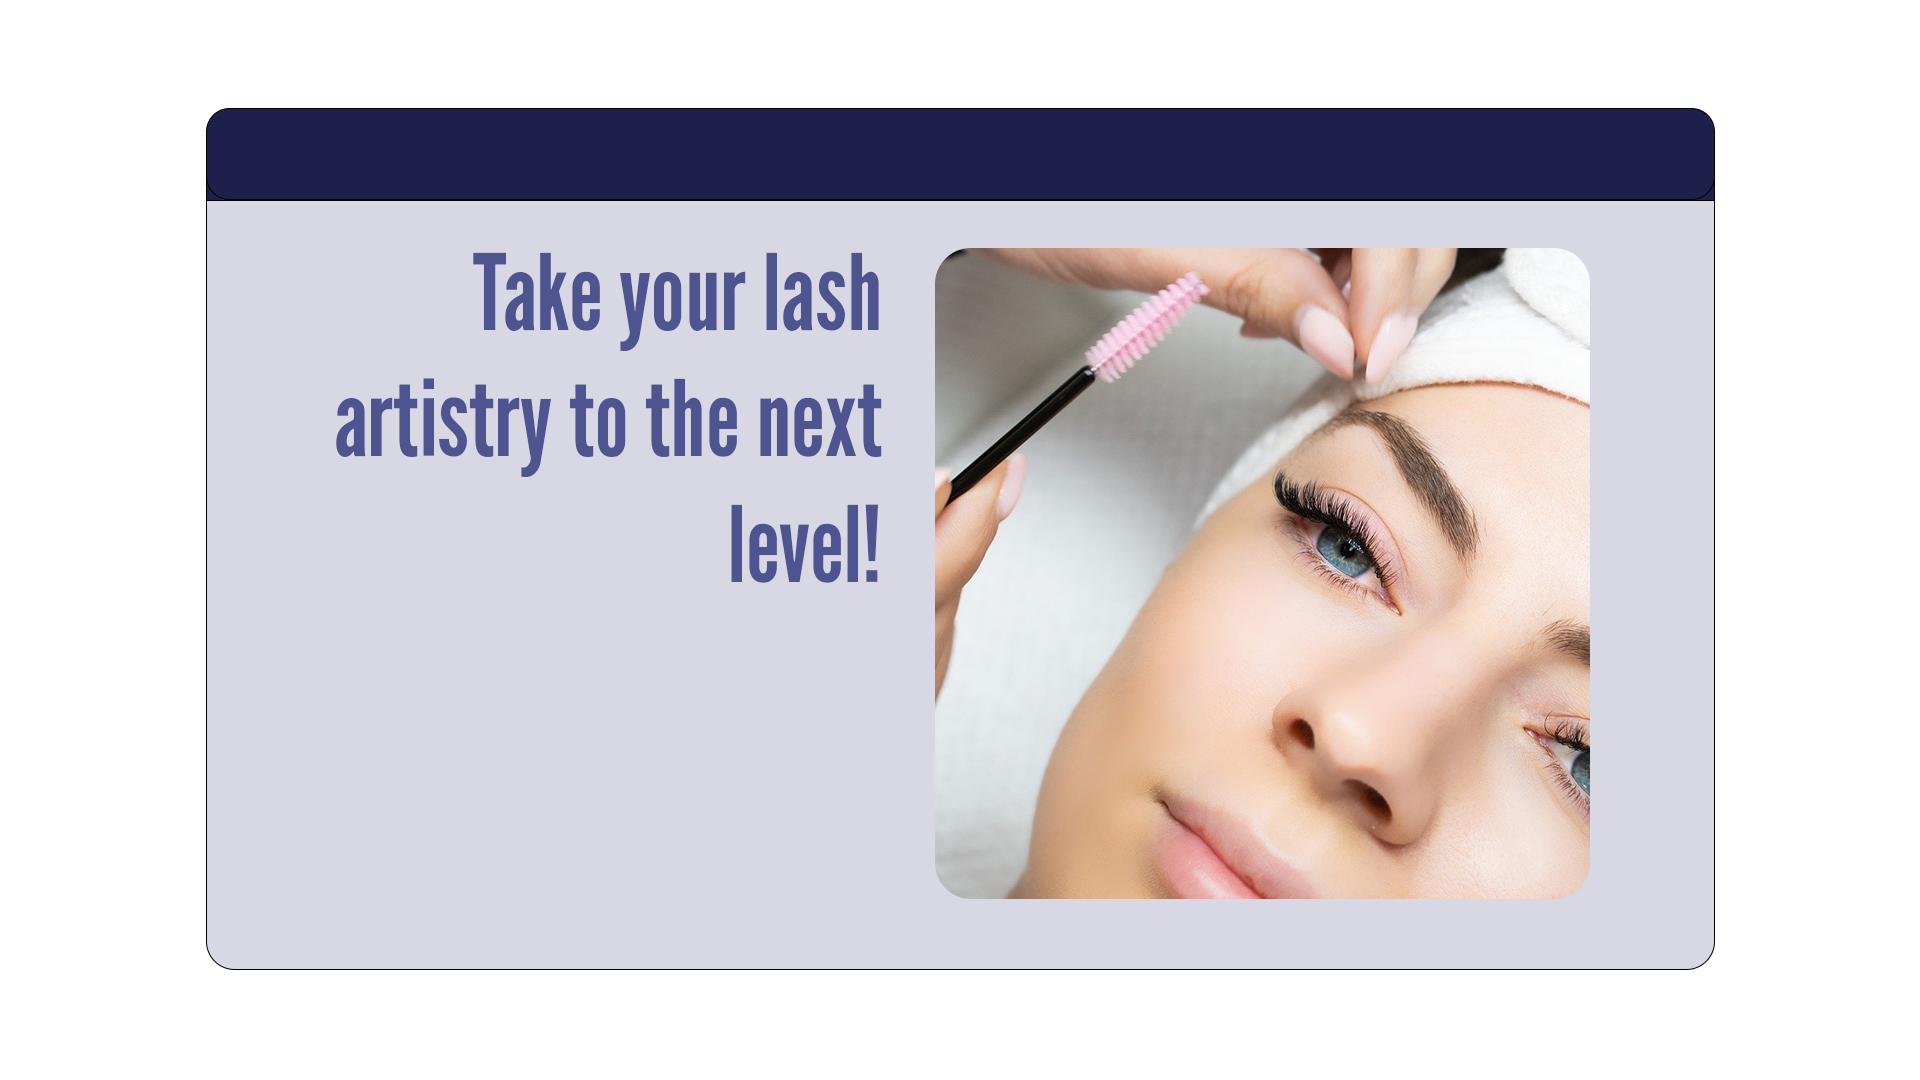 Take your lash artistry to the next level